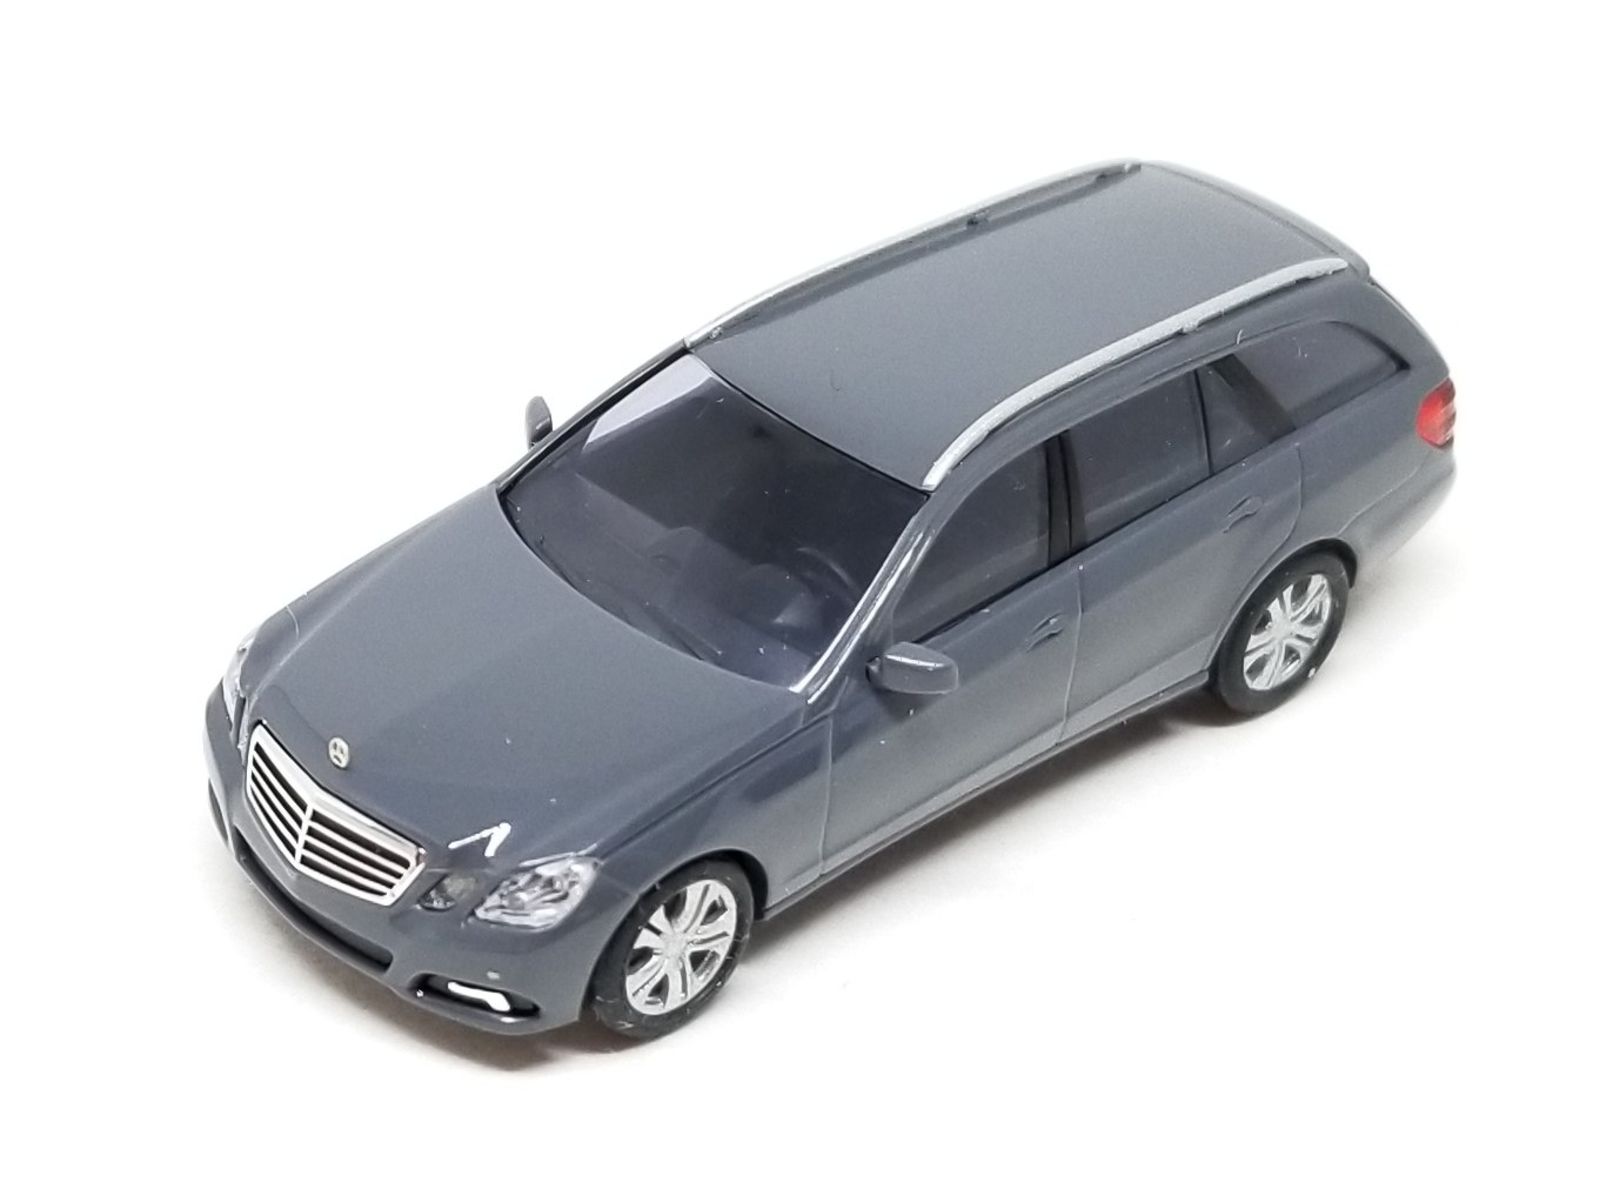 Illustration for article titled Surprise Saturday: Busch HO Scale Mercedes-Benz E-Class Wagon